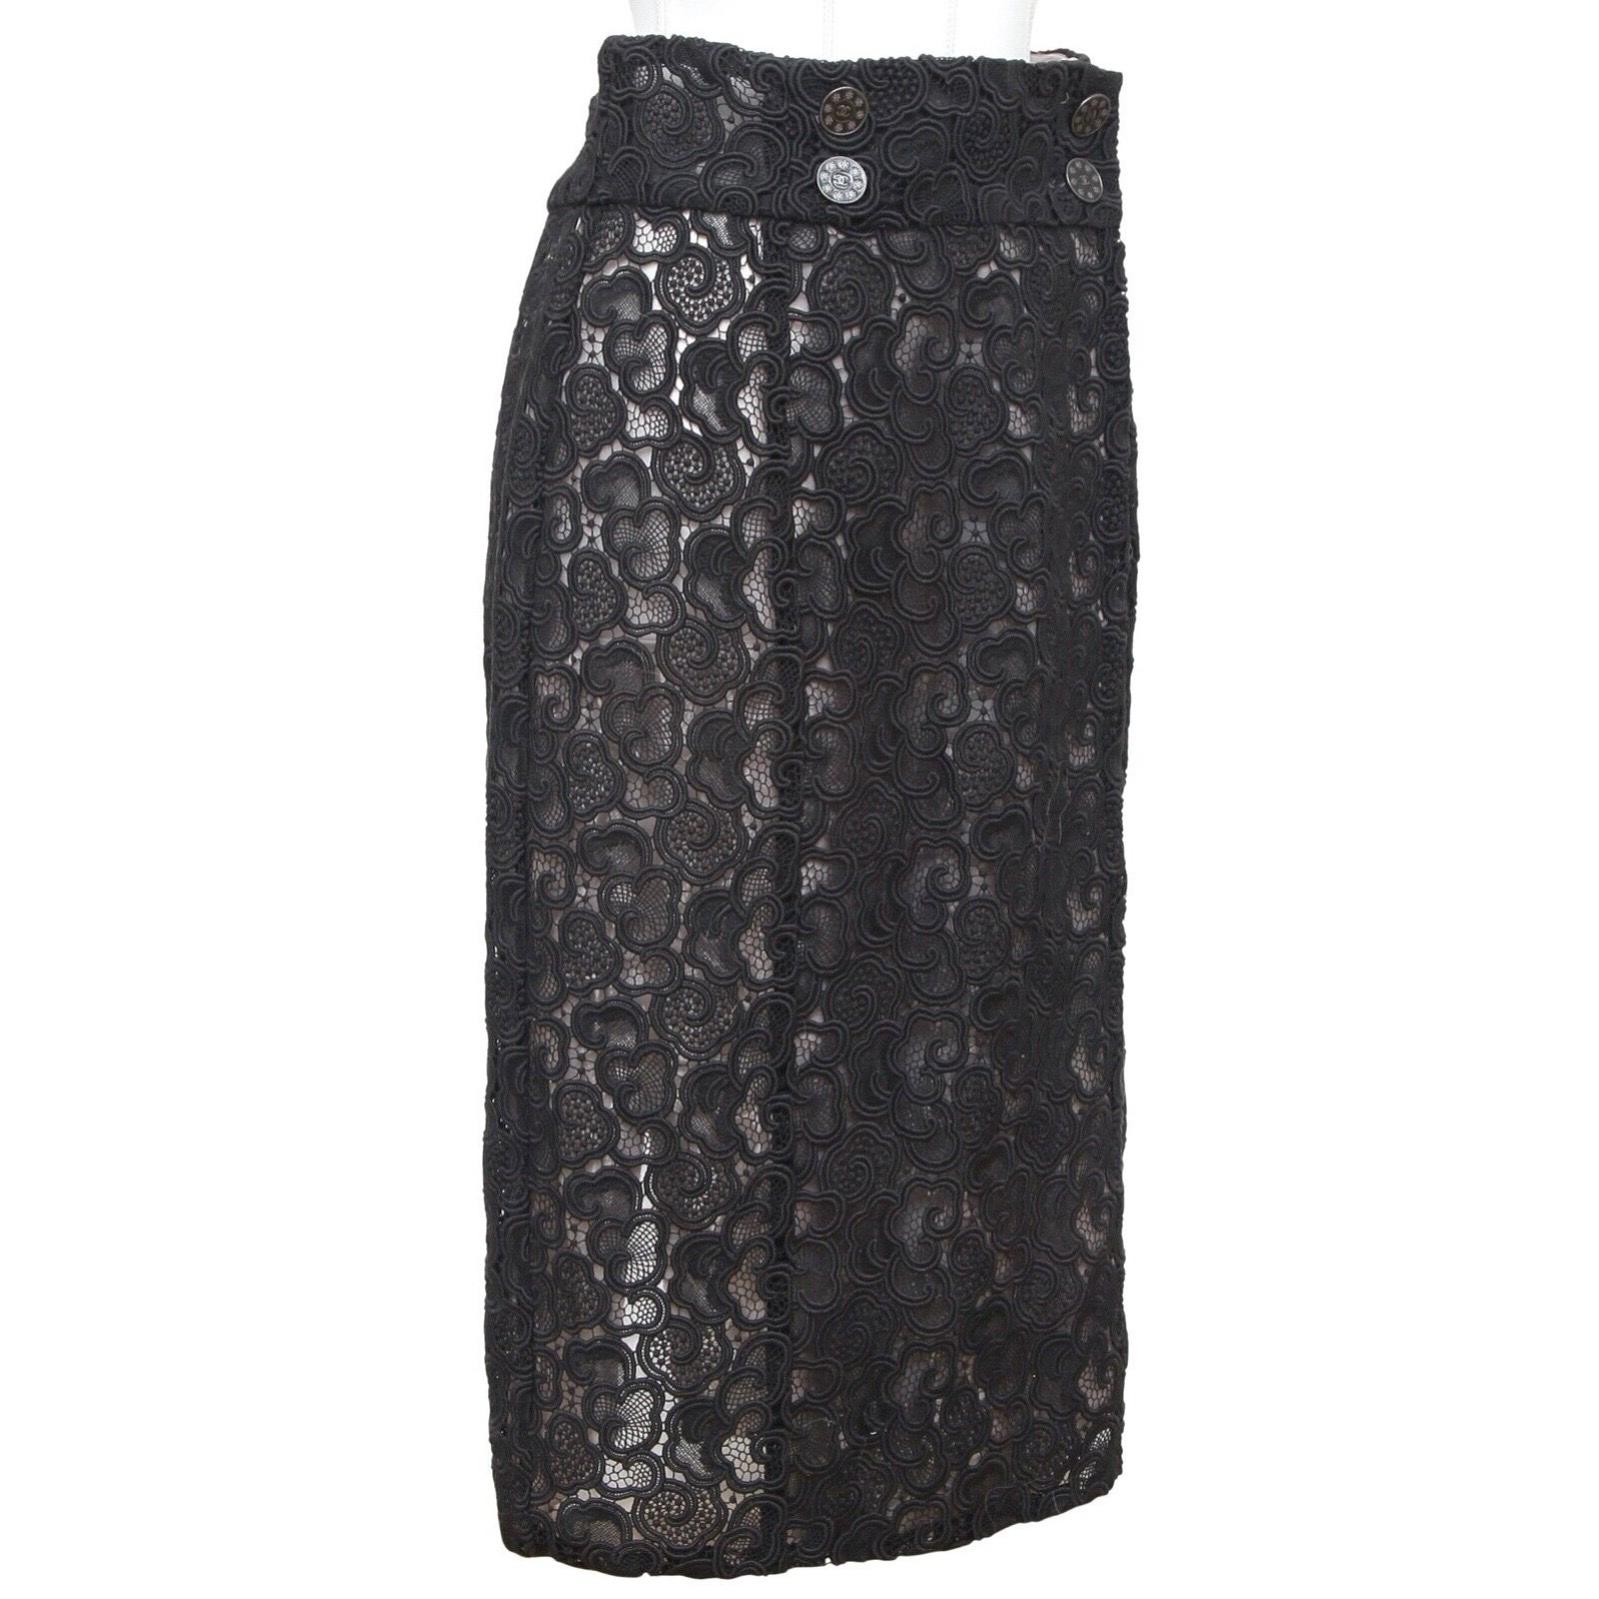 GUARANTEED AUTHENTIC CHANEL PARIS SEOUL 2016 BLACK LACE SKIRT


Design:
- Stunning heavier weight cotton blend faux wrap lace skirt.
- Faux double collection buttons at front waistline.
- Concealed front buttons closure.
- Rear vent.
- Fully lined